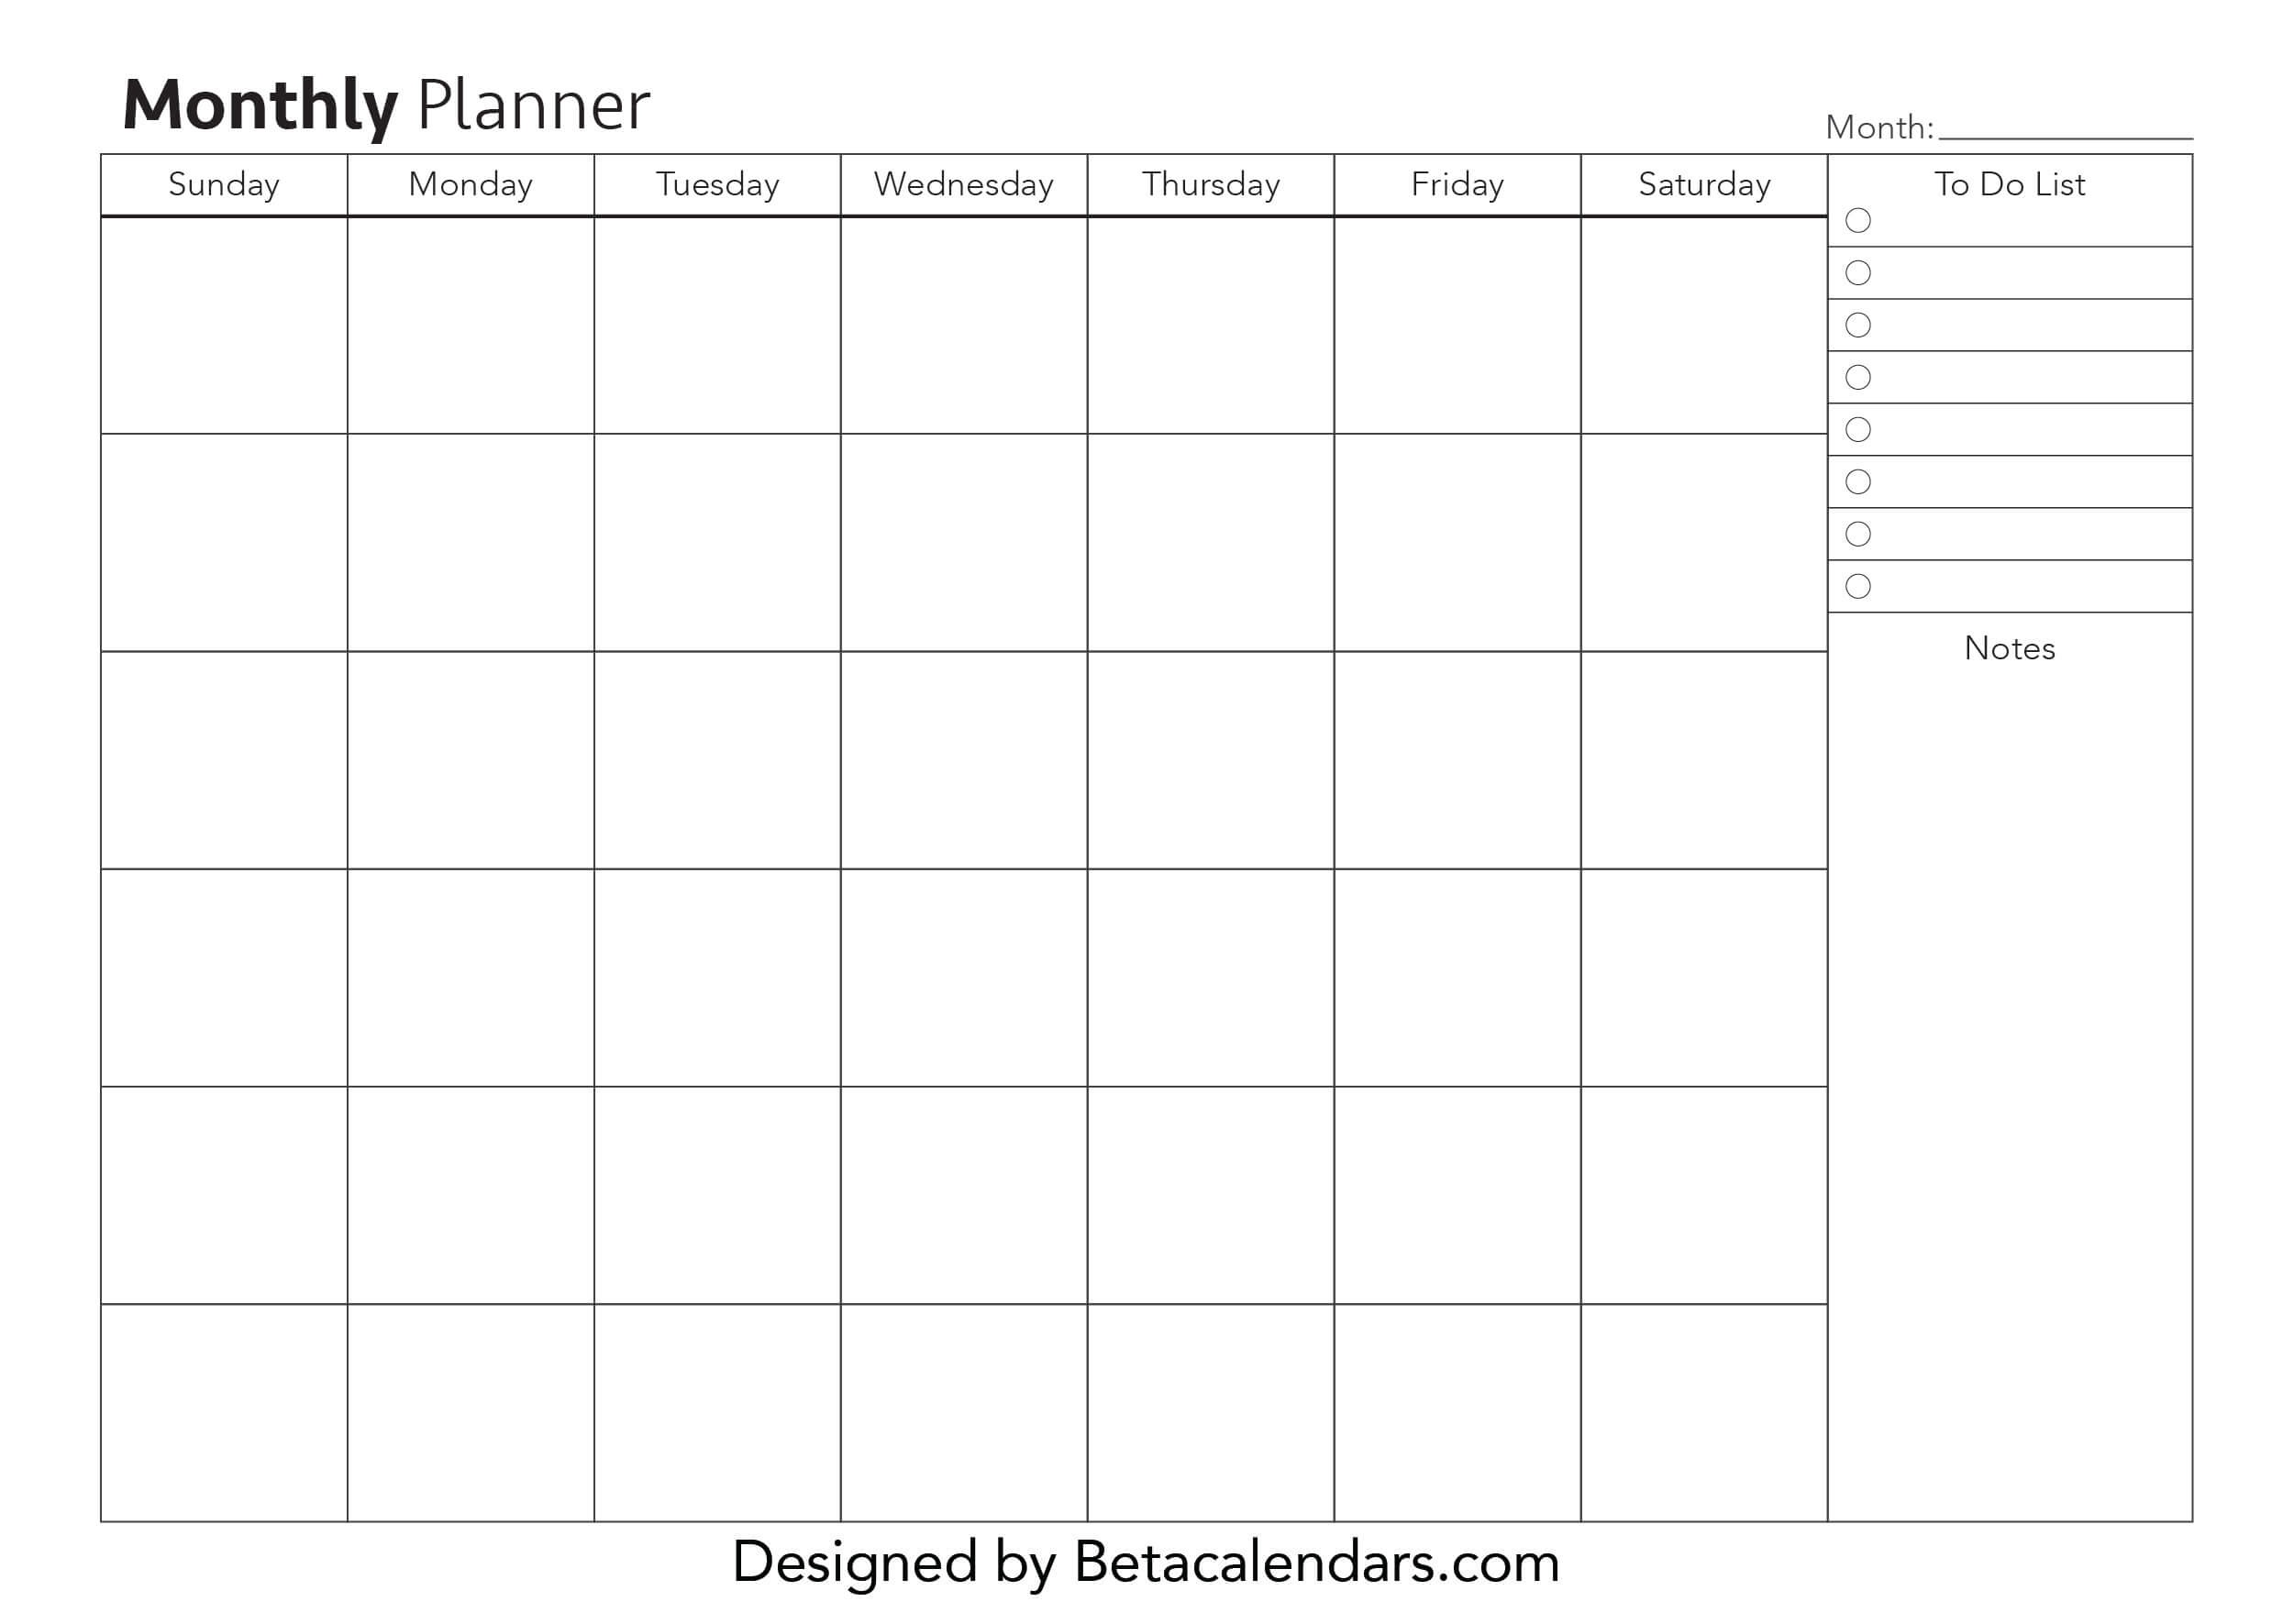 free-monthly-planner-template-printable-templates